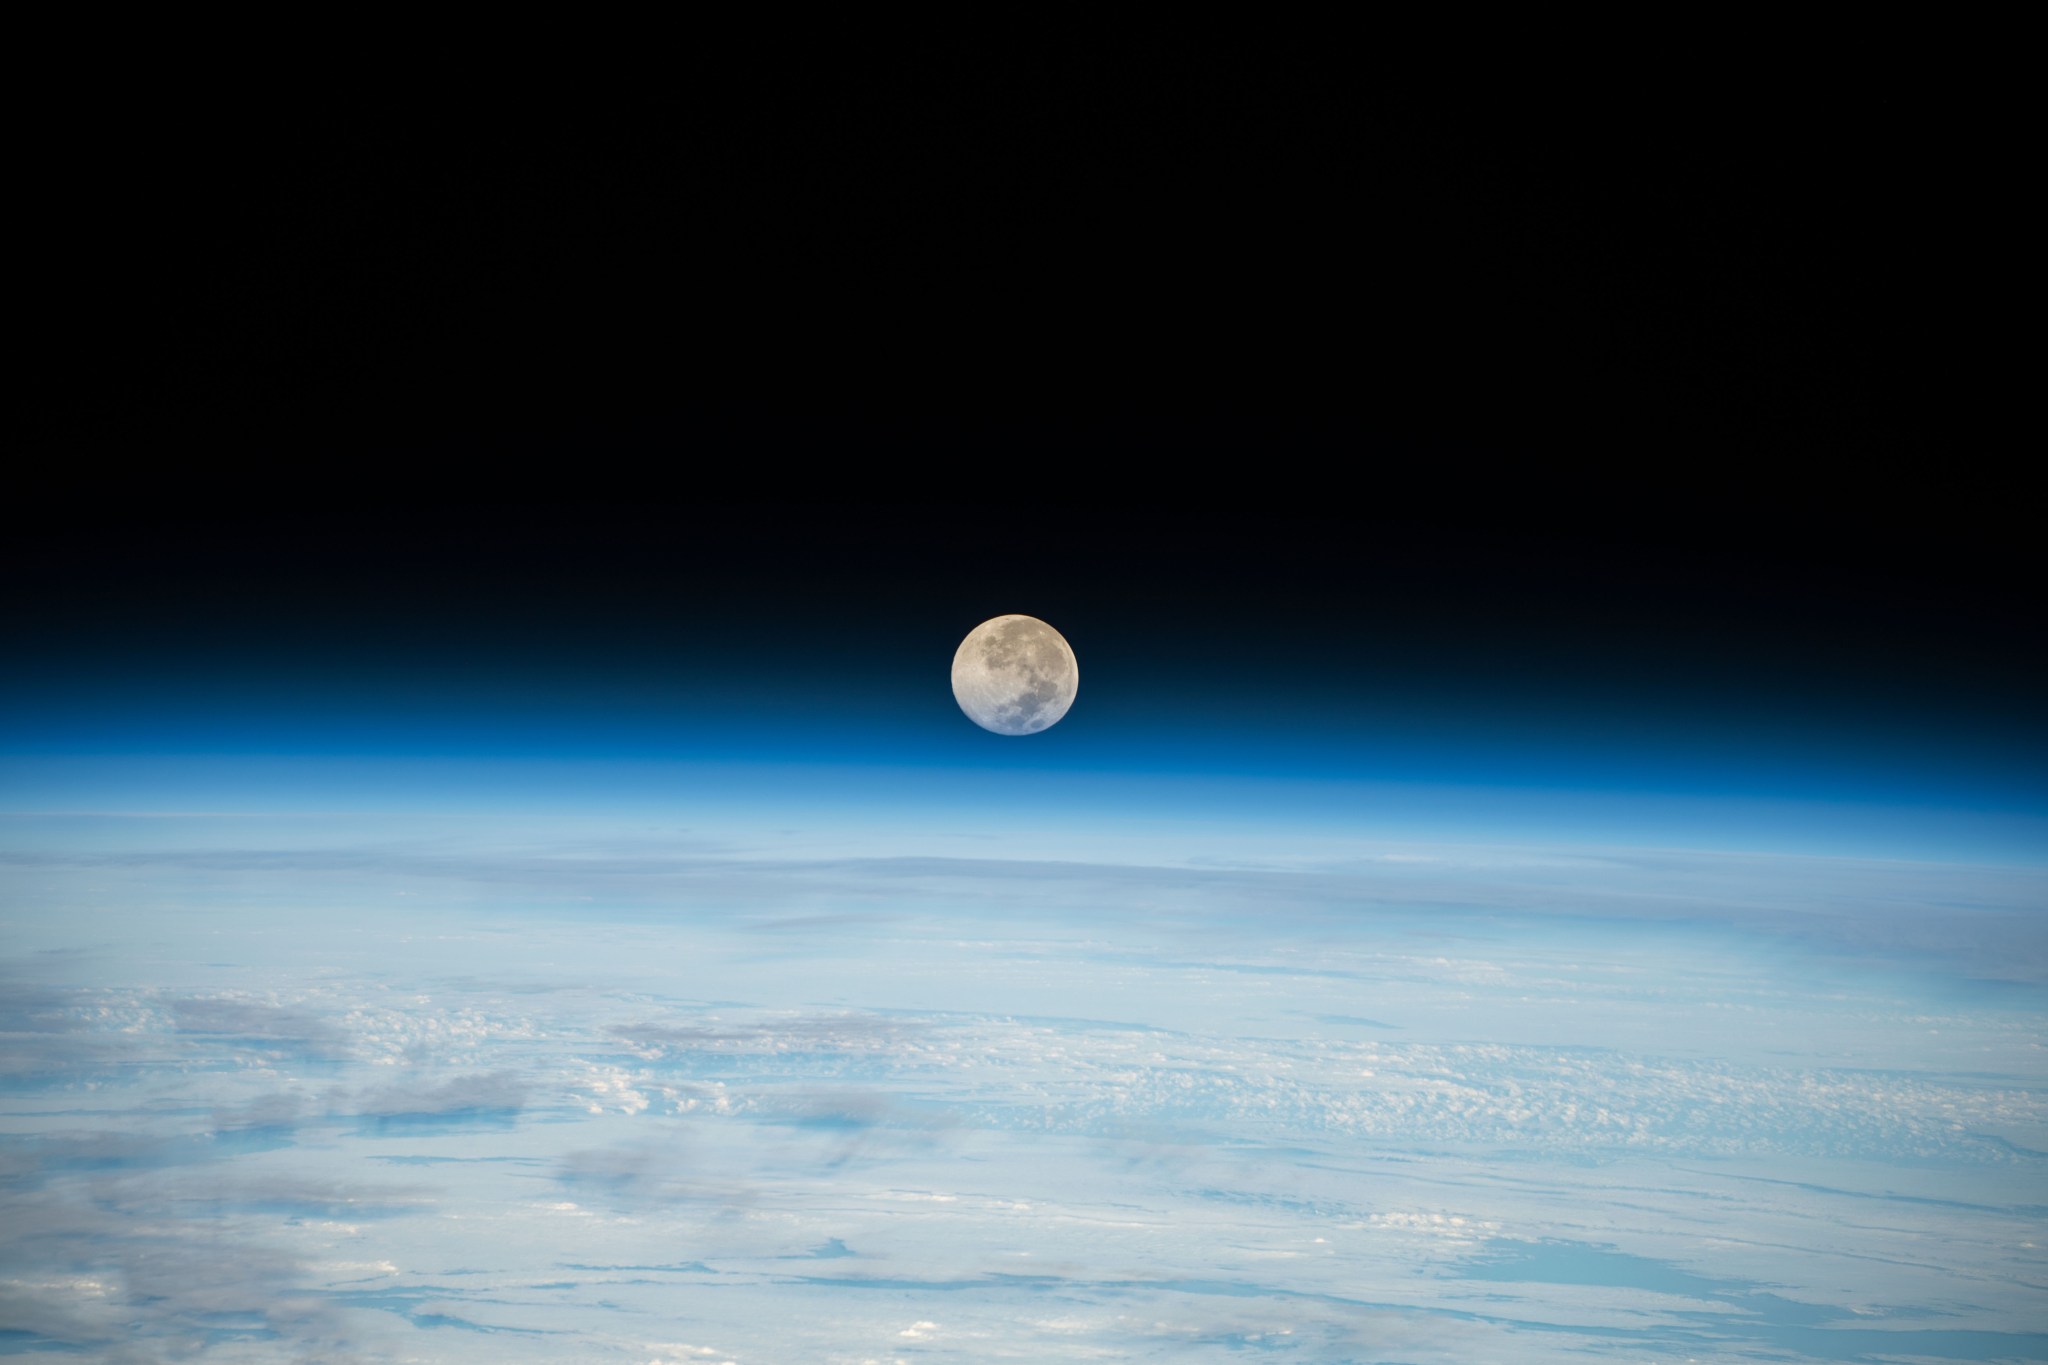 The Full Moon is pictured setting below Earth's horizon from the International Space Station as it orbited 262 miles above the Pacific Ocean.